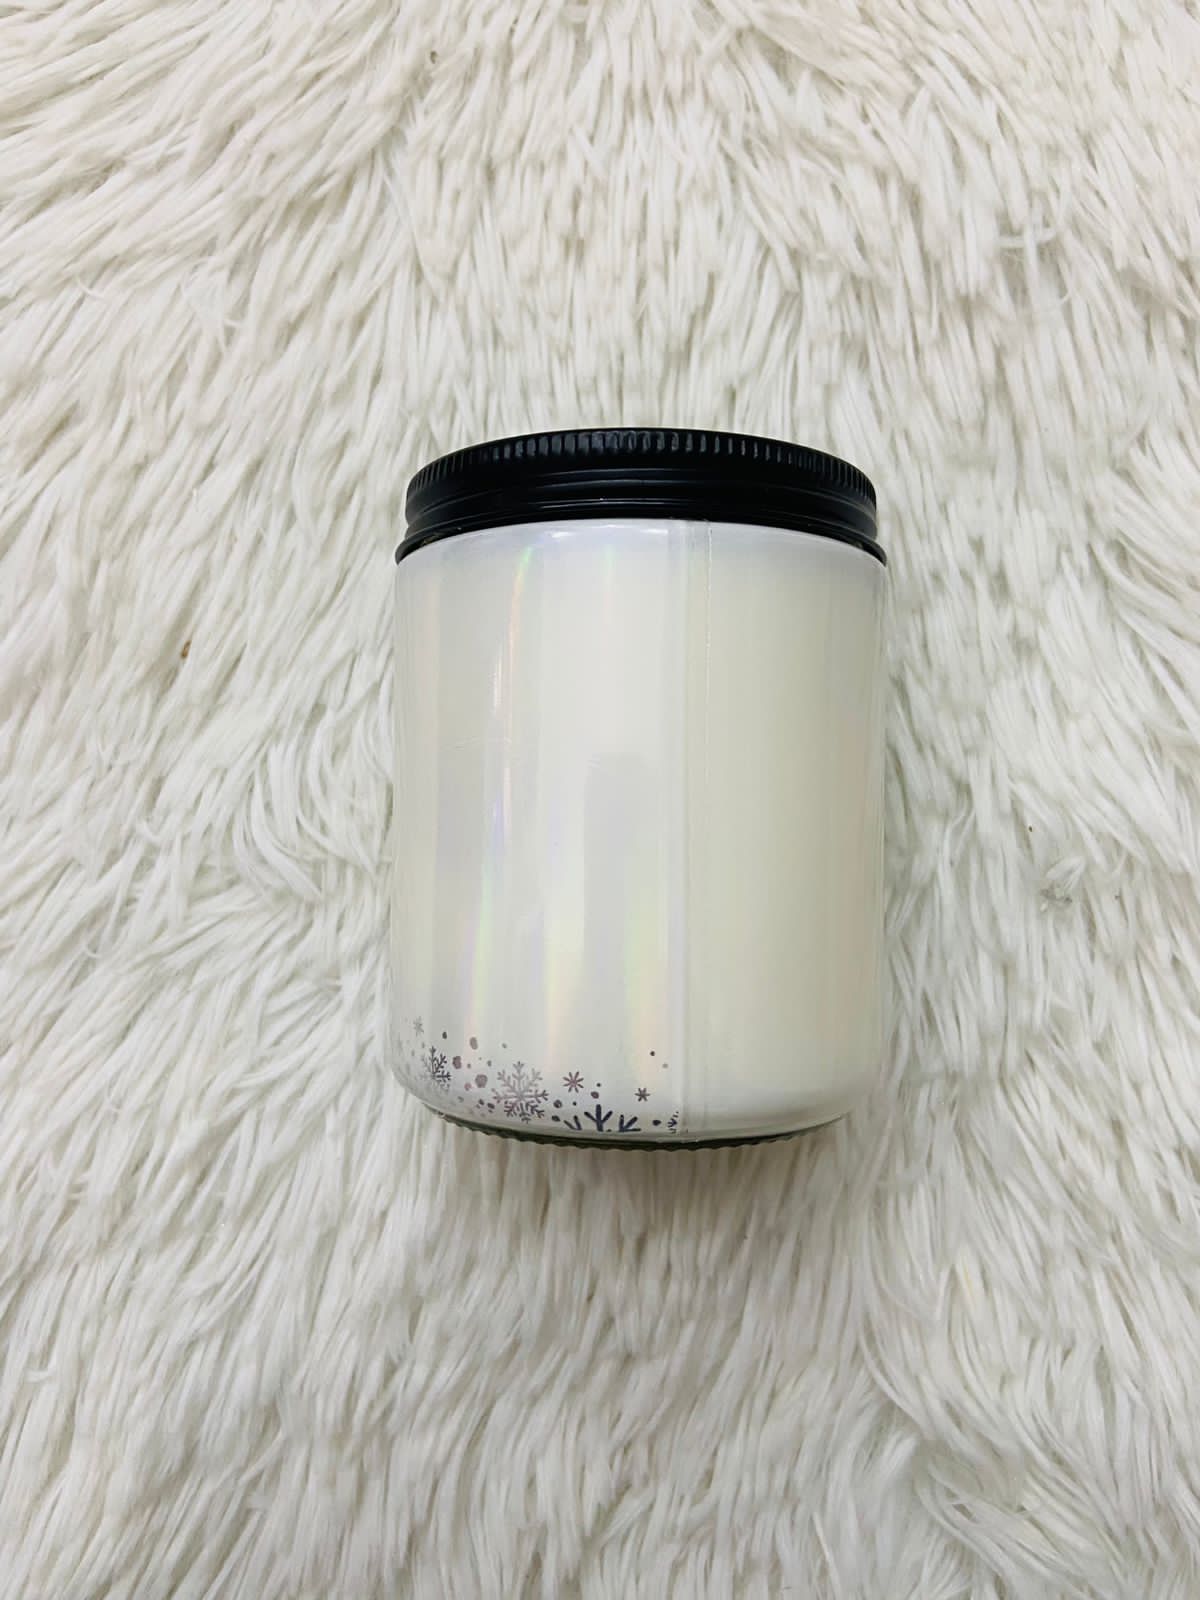 Vela Aromática WHITE BARN, Peppermint Sugar Cookie. (Scented candle made with natural oils)